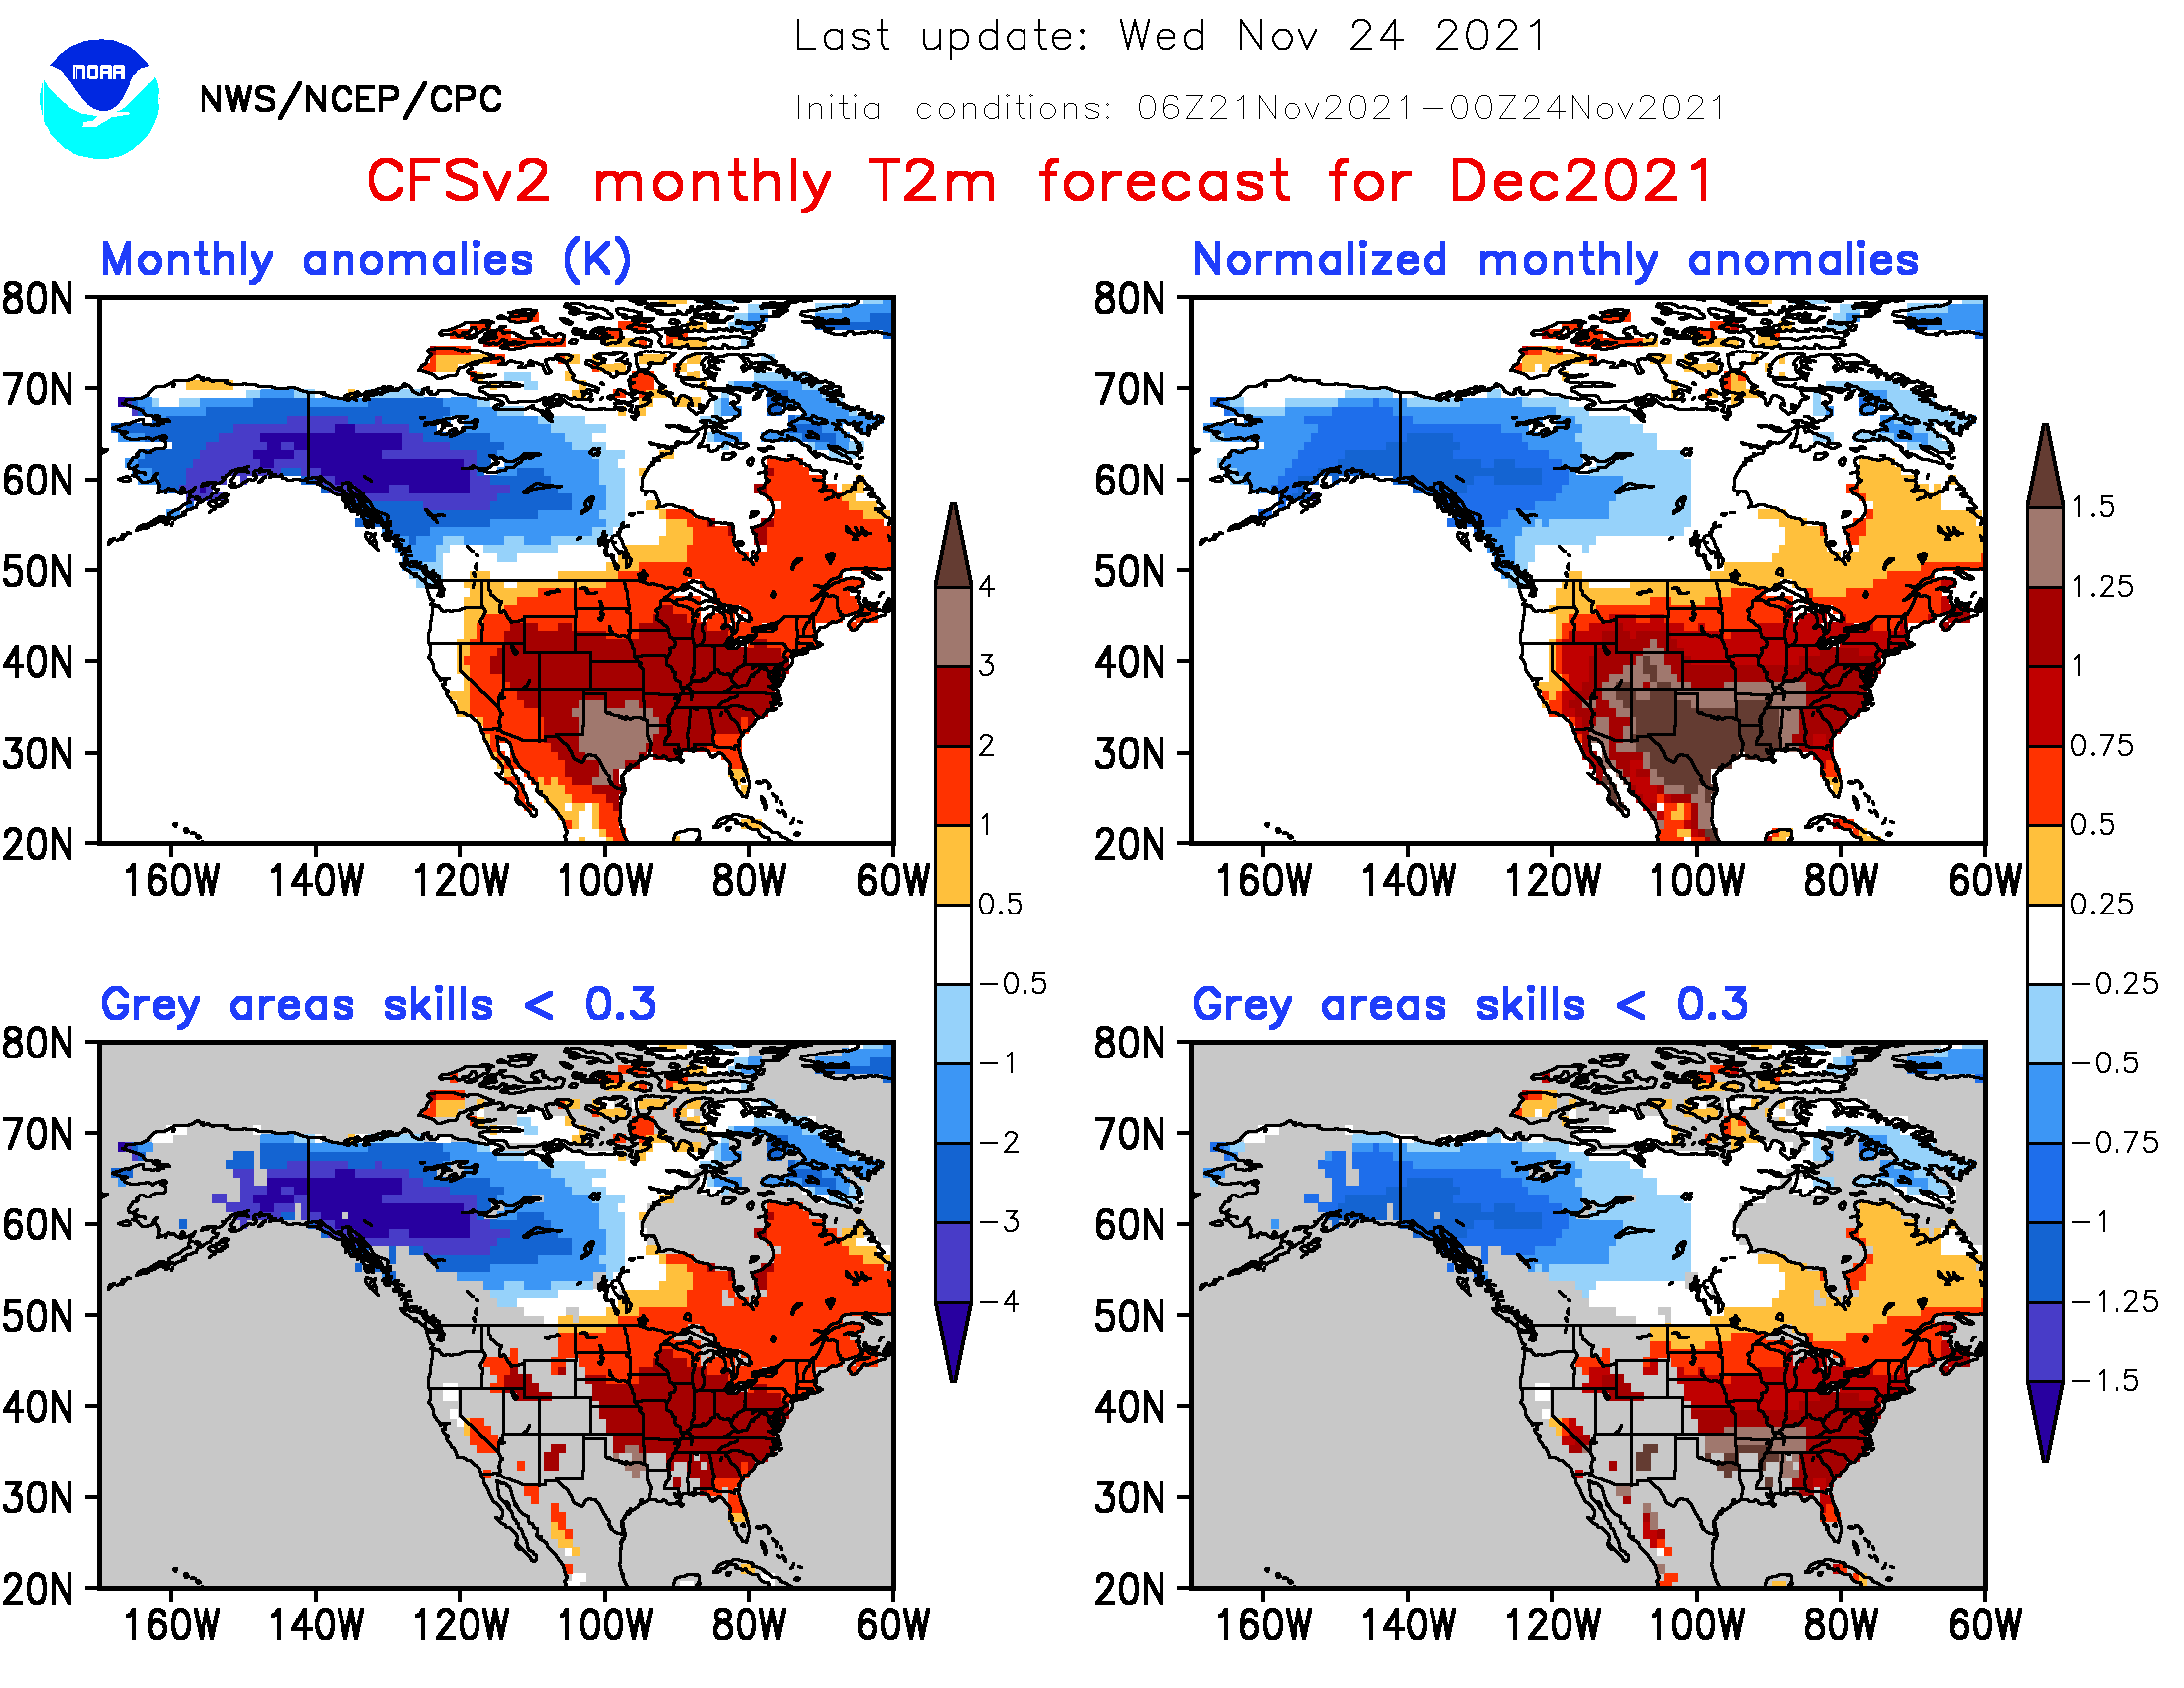 https://www.cpc.ncep.noaa.gov/products/people/mchen/CFSv2FCST/monthly/images/CFSv2.NaT2m.20211124.202112.gif